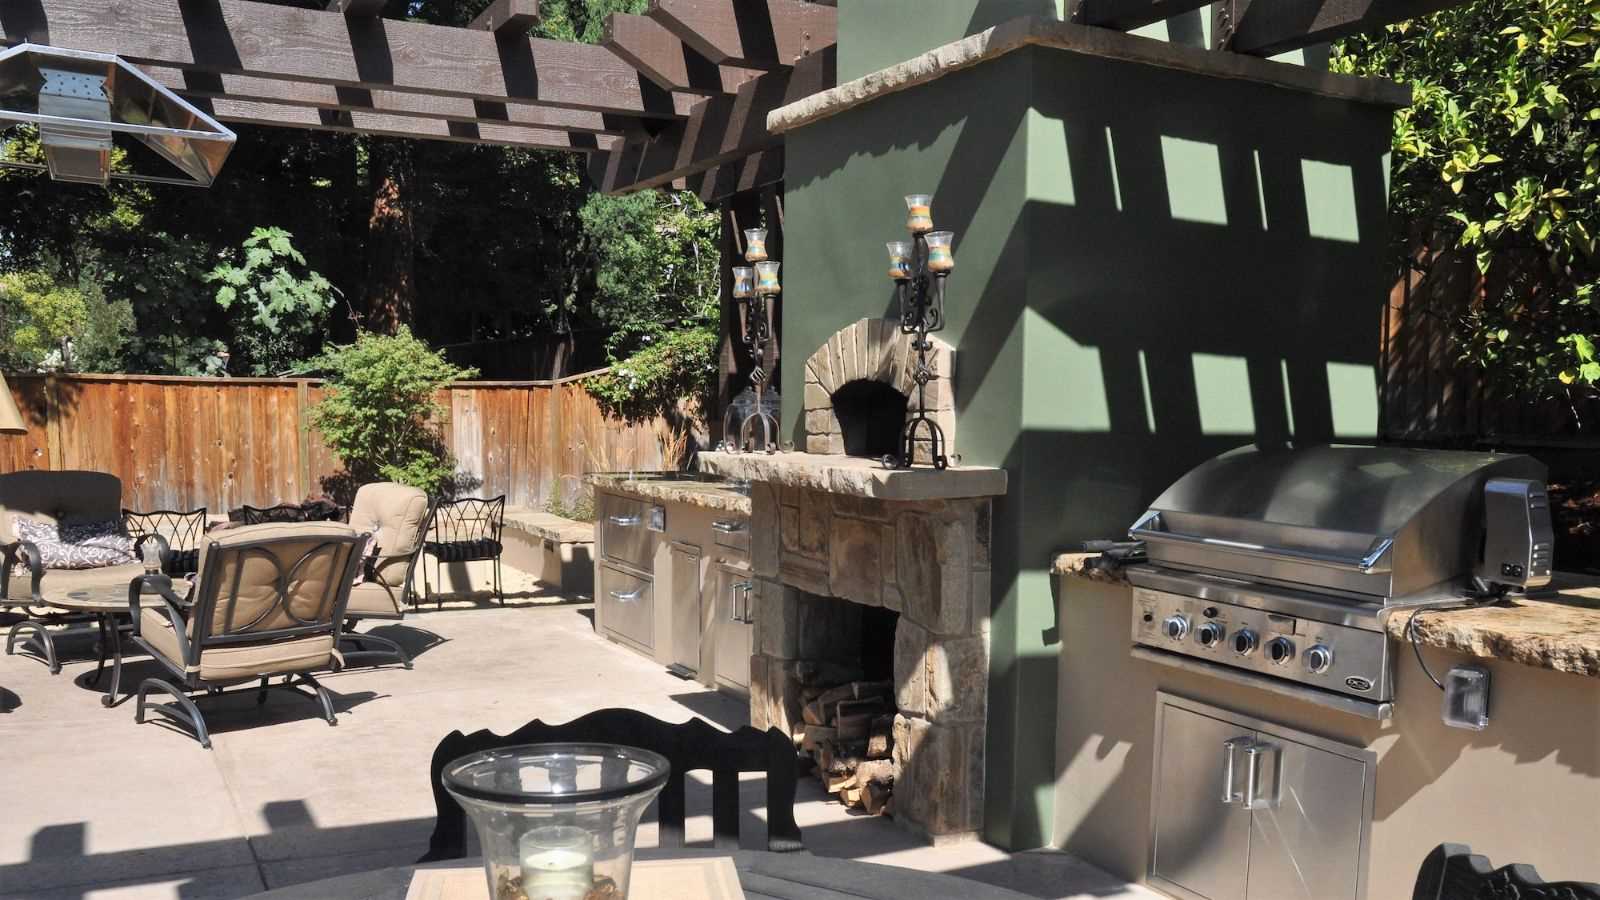 An Outdoor Kitchen Designer For Customized Spaces - Koch and Associates